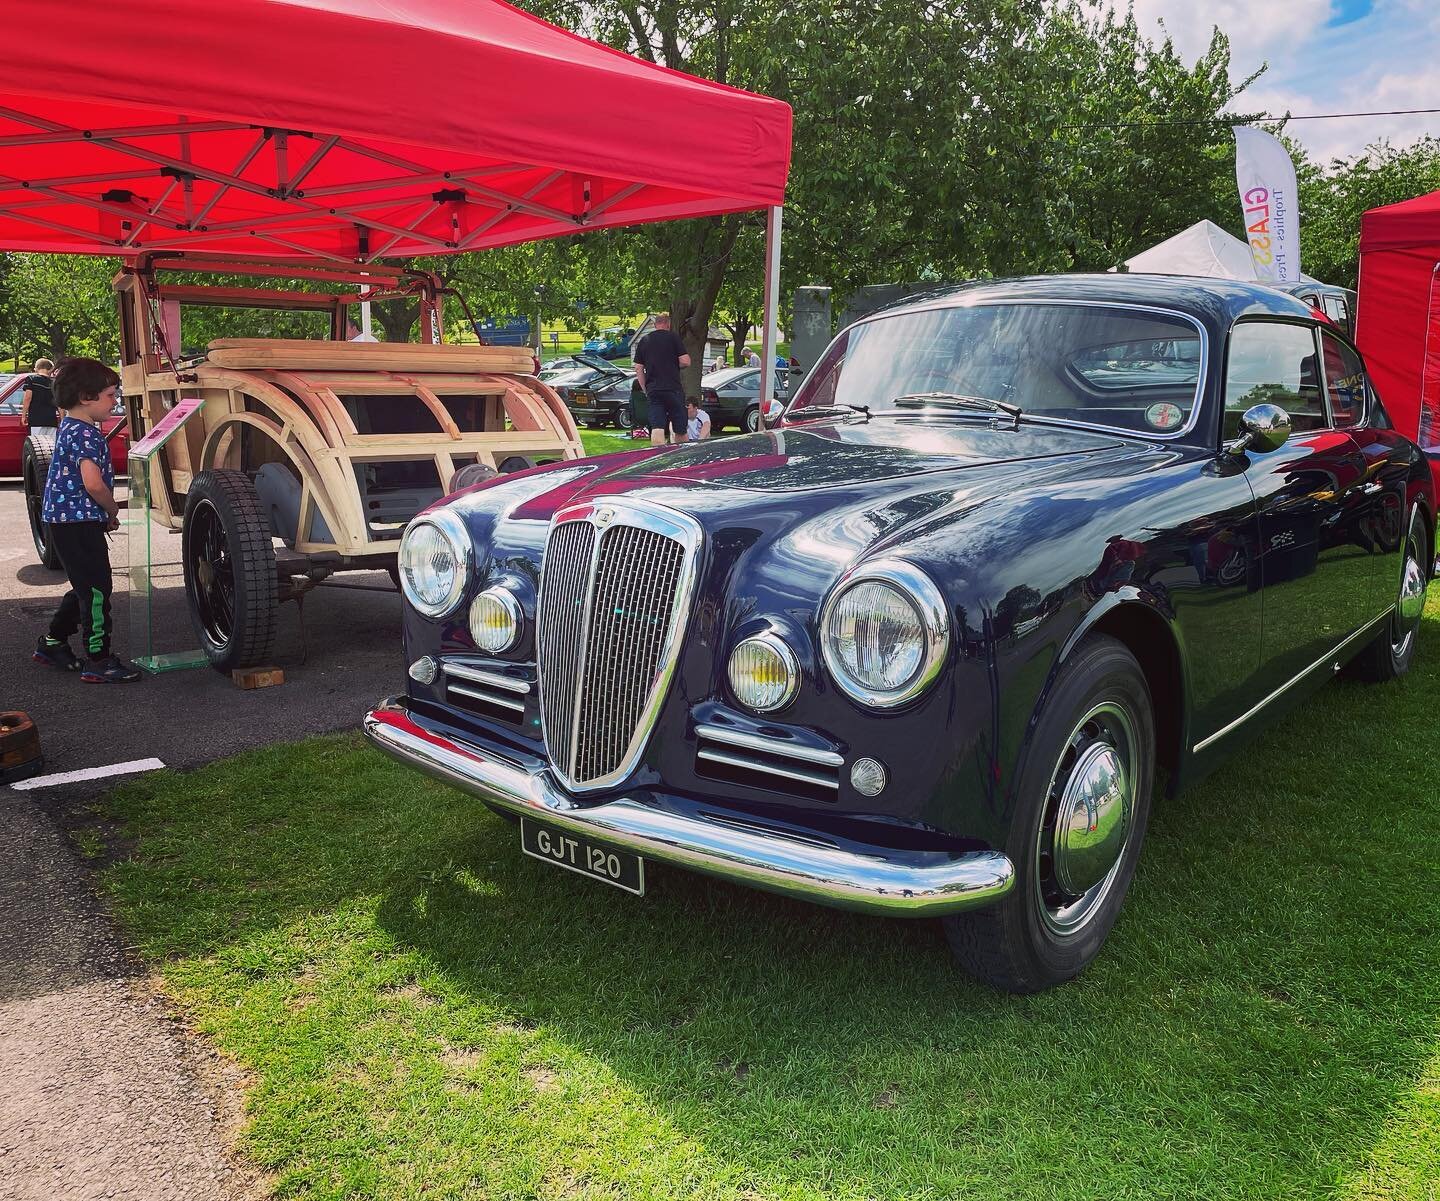 A great day out @prescottspeedhillclimb today. #prescotthillclimb #italia #italiaday #italianday #lancia #lanciab20gt #lanciaaurelia #lancialambda #prescotthillclimb #classiccars